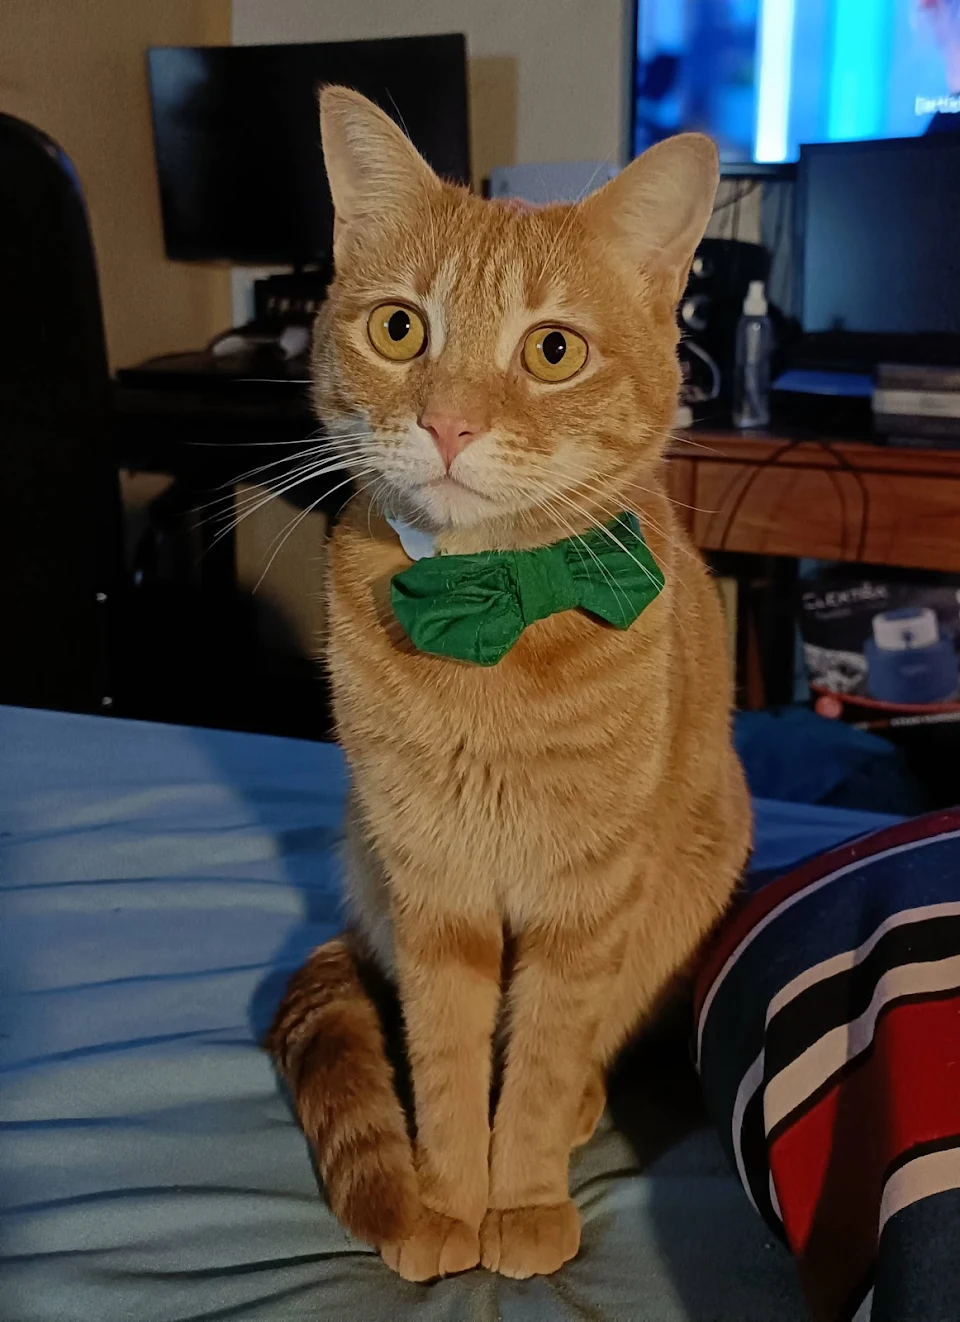 My wife made him the bowtie and now he's a dapper young man